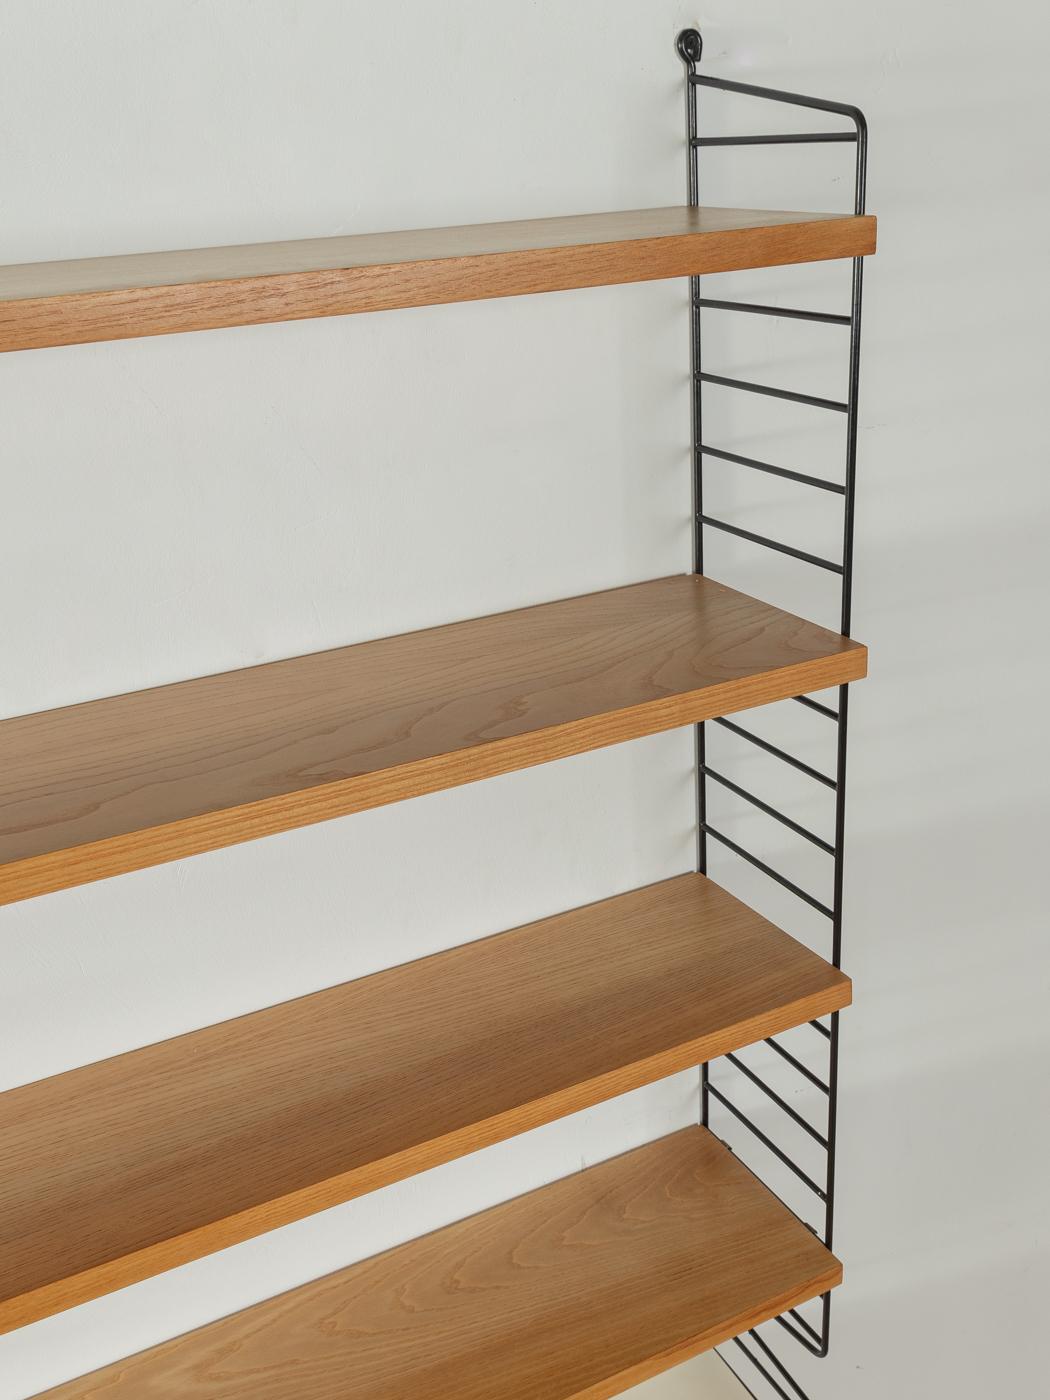  1950s Shelving System, Nils Strinning  For Sale 2